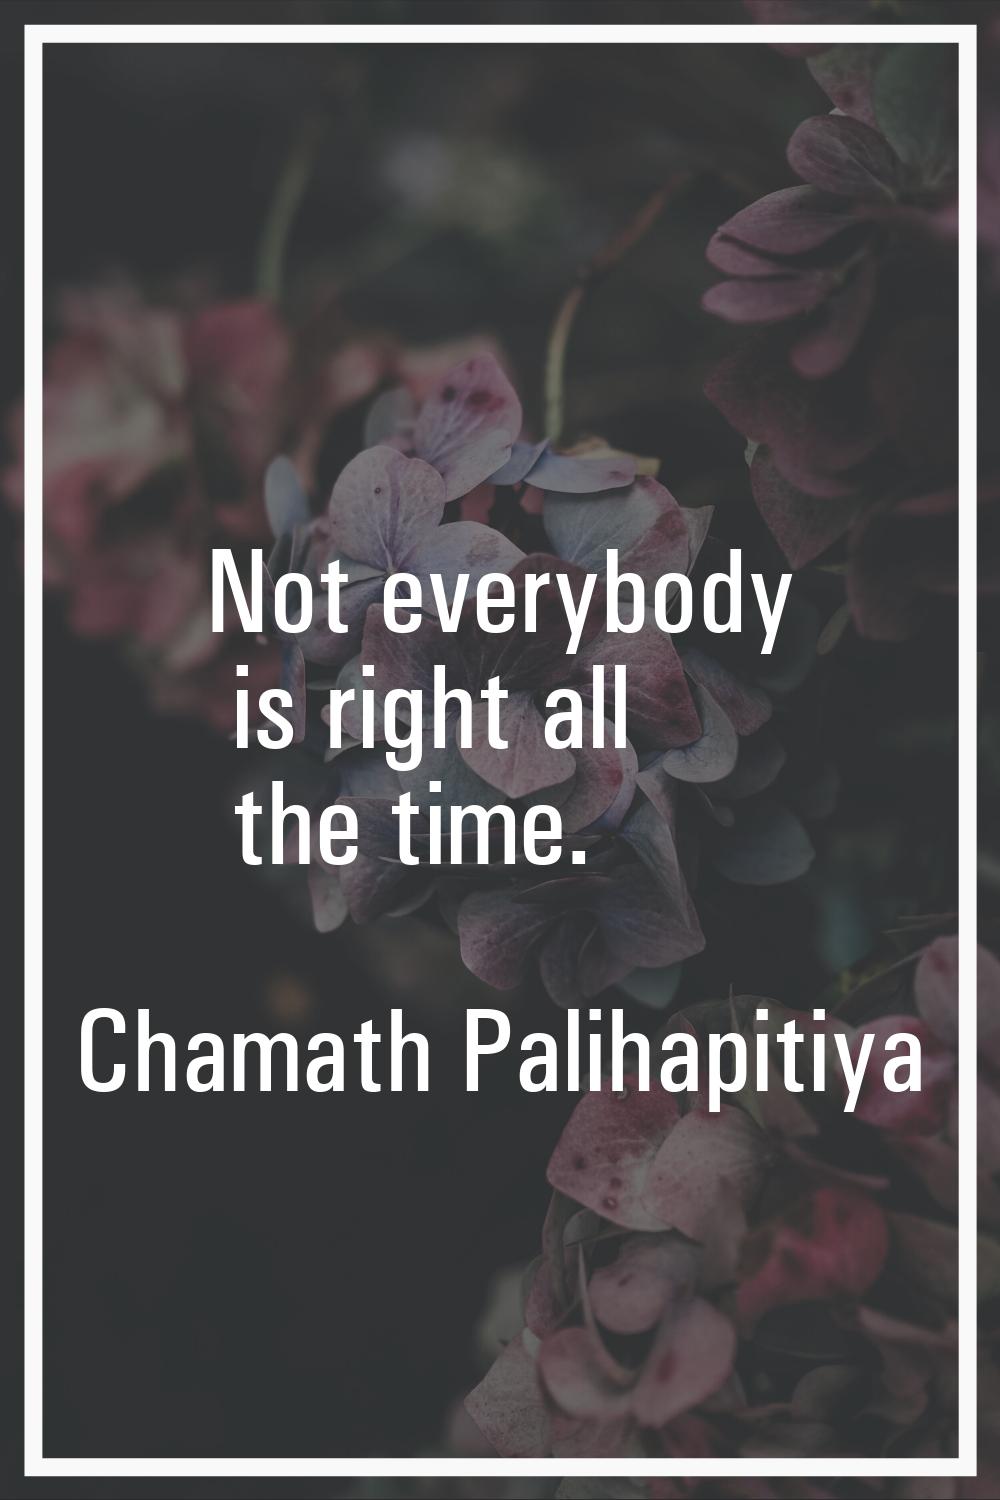 Not everybody is right all the time.